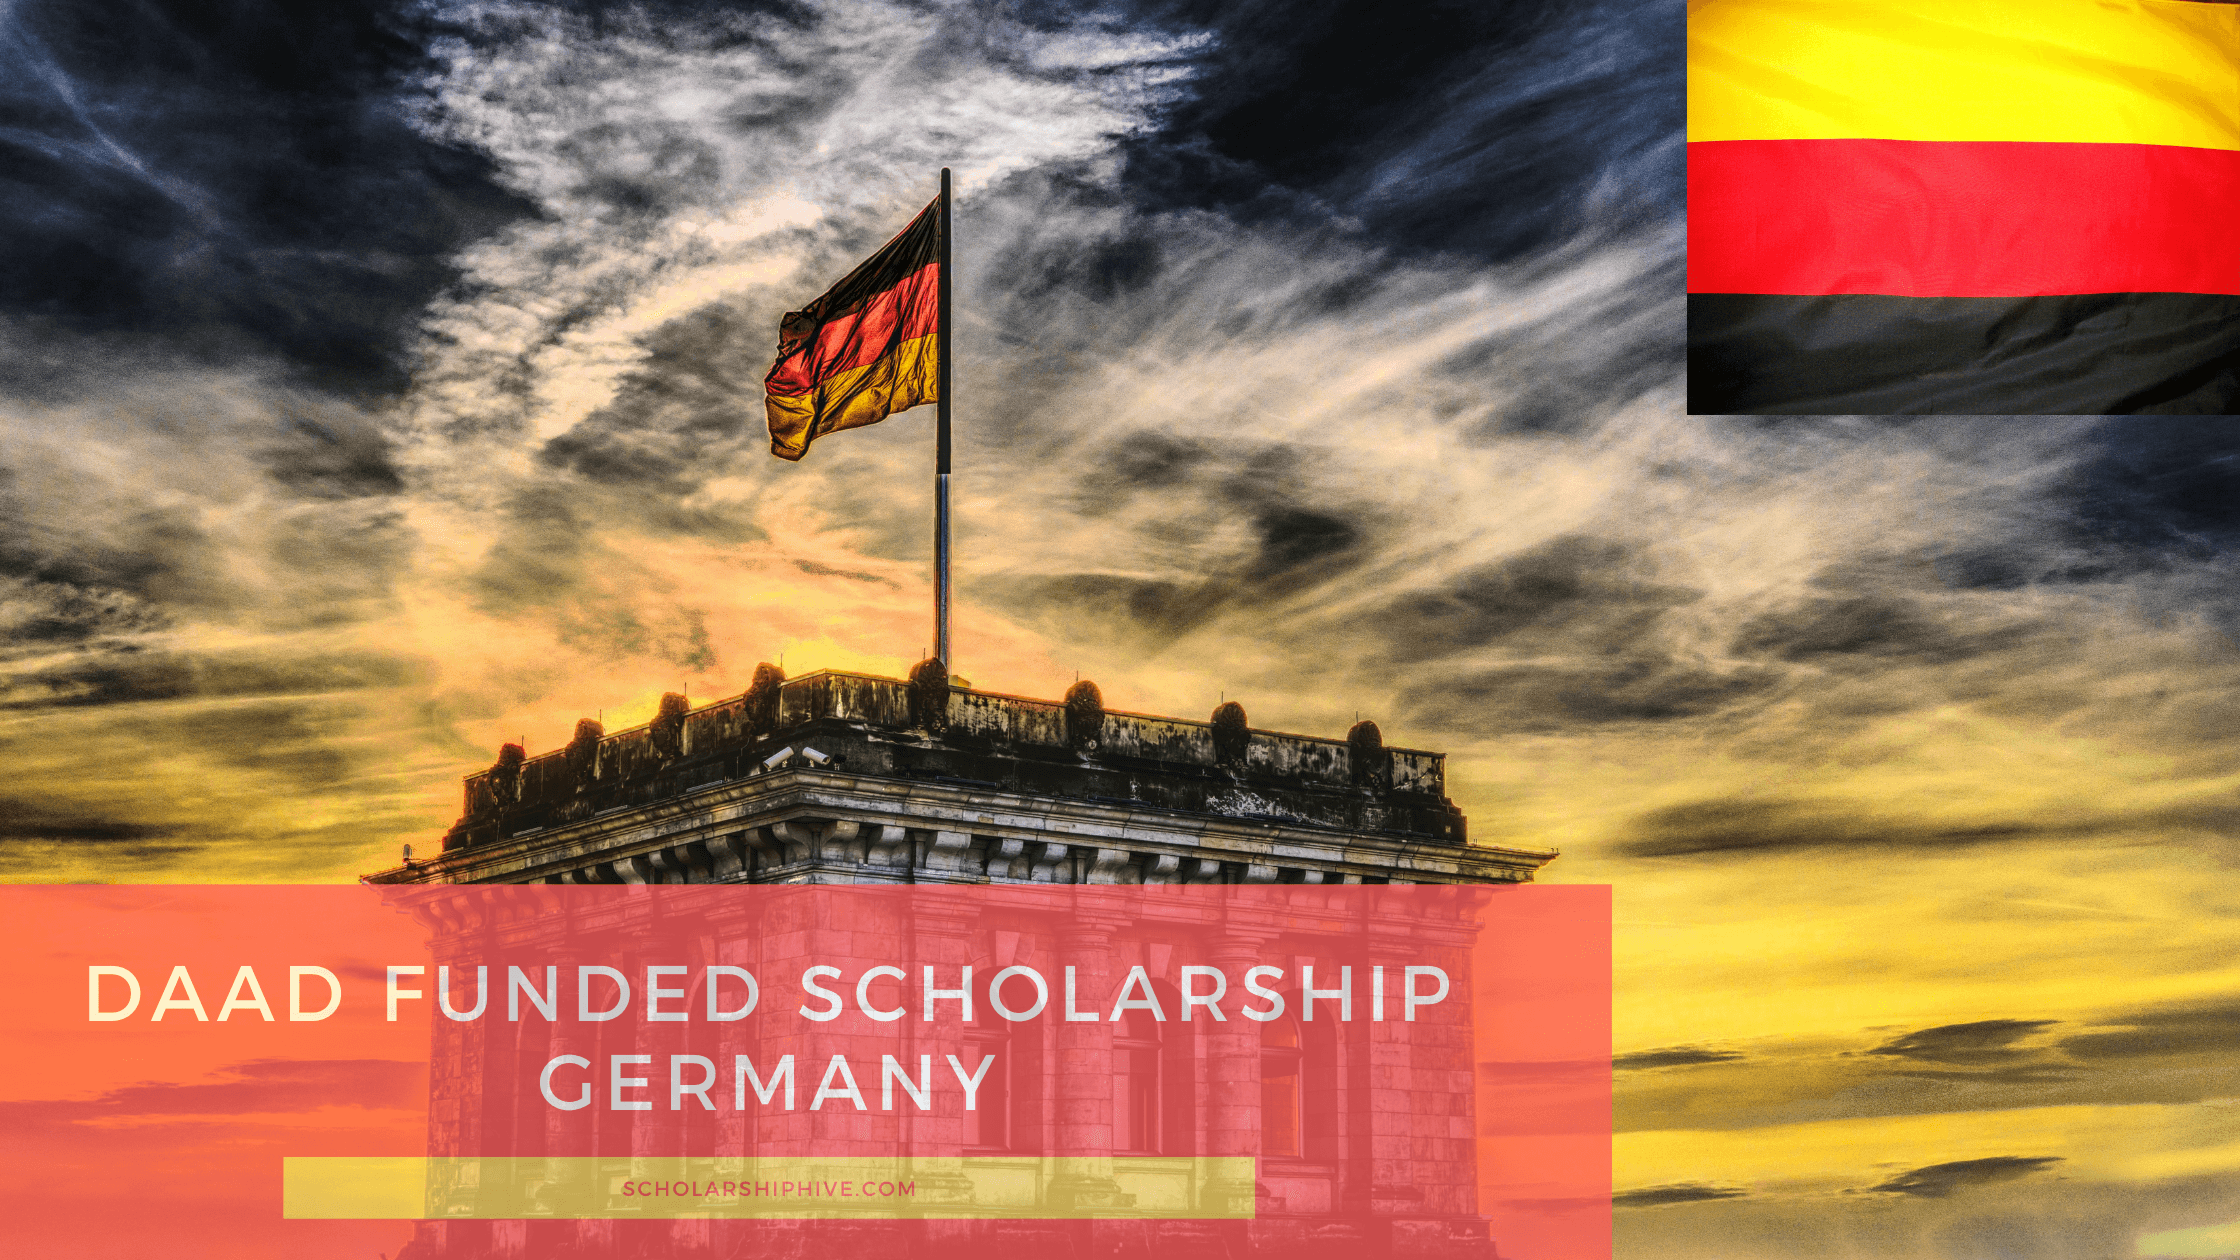 DAAD Funded Scholarship Germany - Scholarshiphive